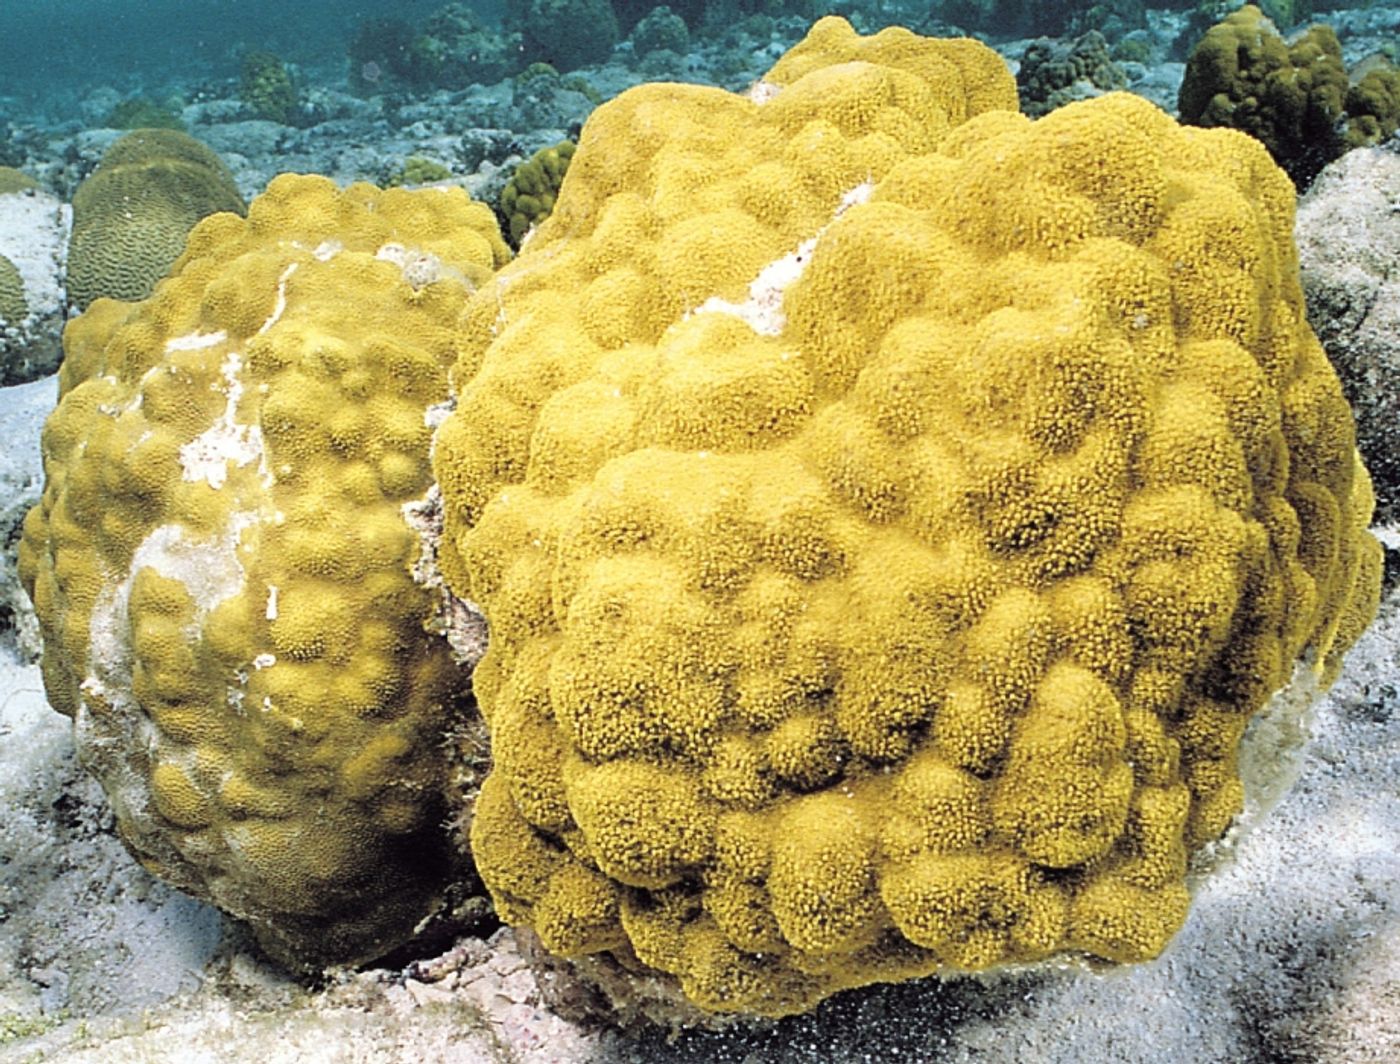 The coral Porites astreoides